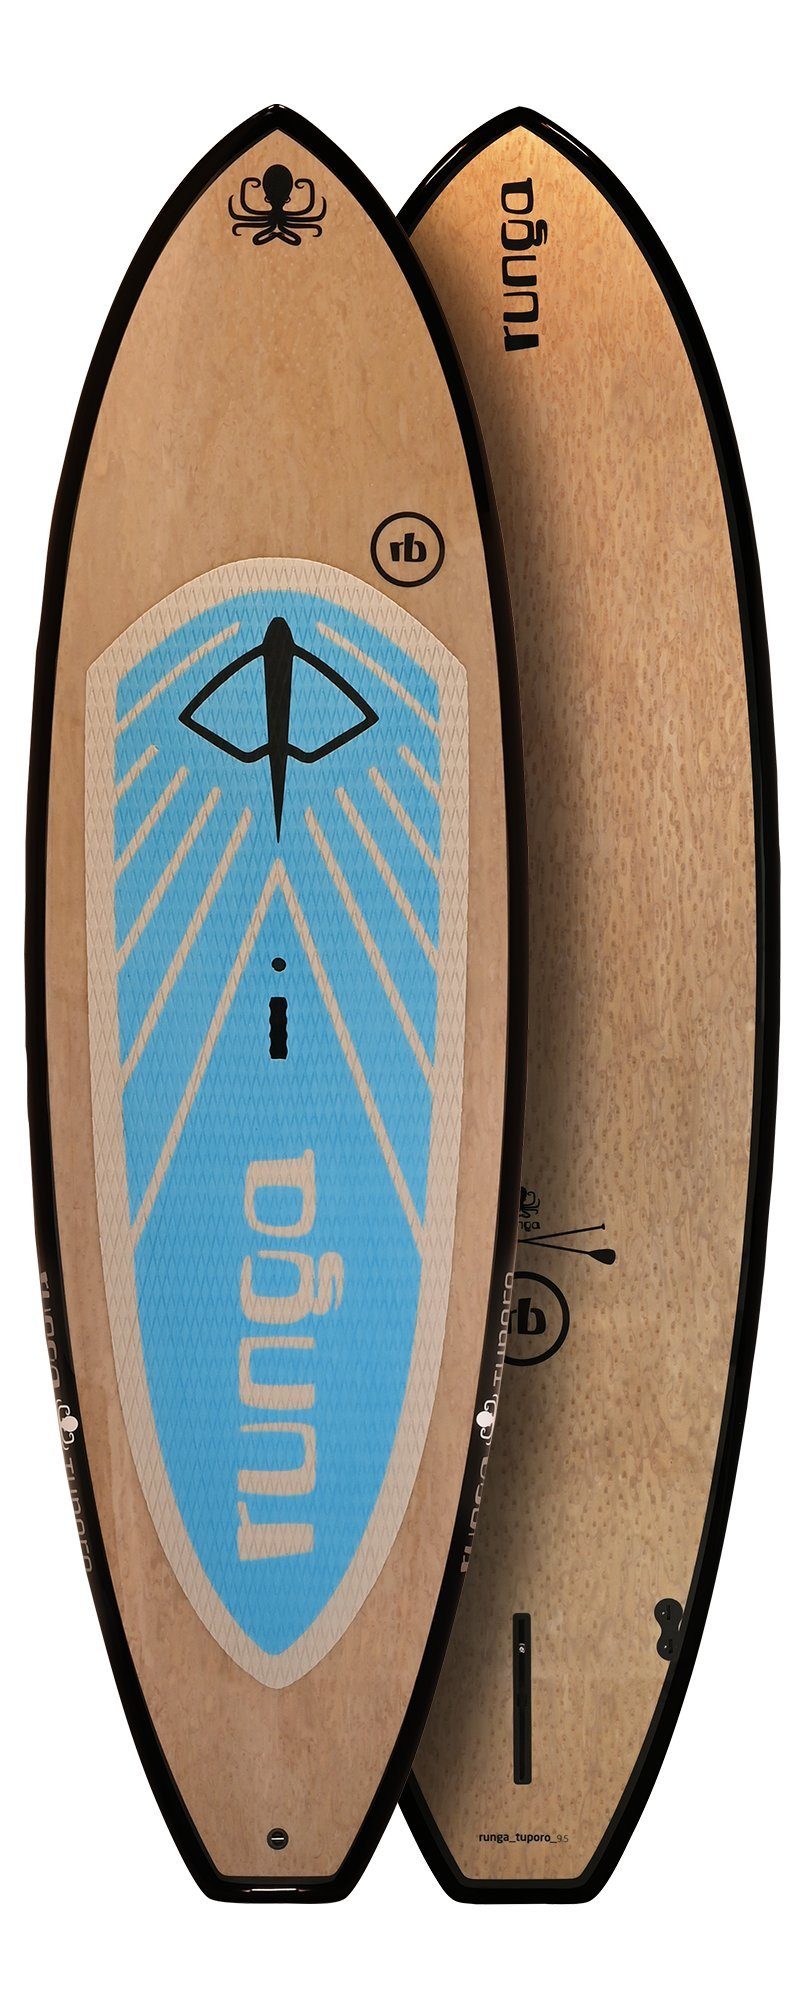 Runga-Boards SUP-Board Runga TUPORO Finnen-Set) Up Paddling & 3-tlg. Board SUP, (10.0, Hard Stand inkl. Lash BLUE Coiled